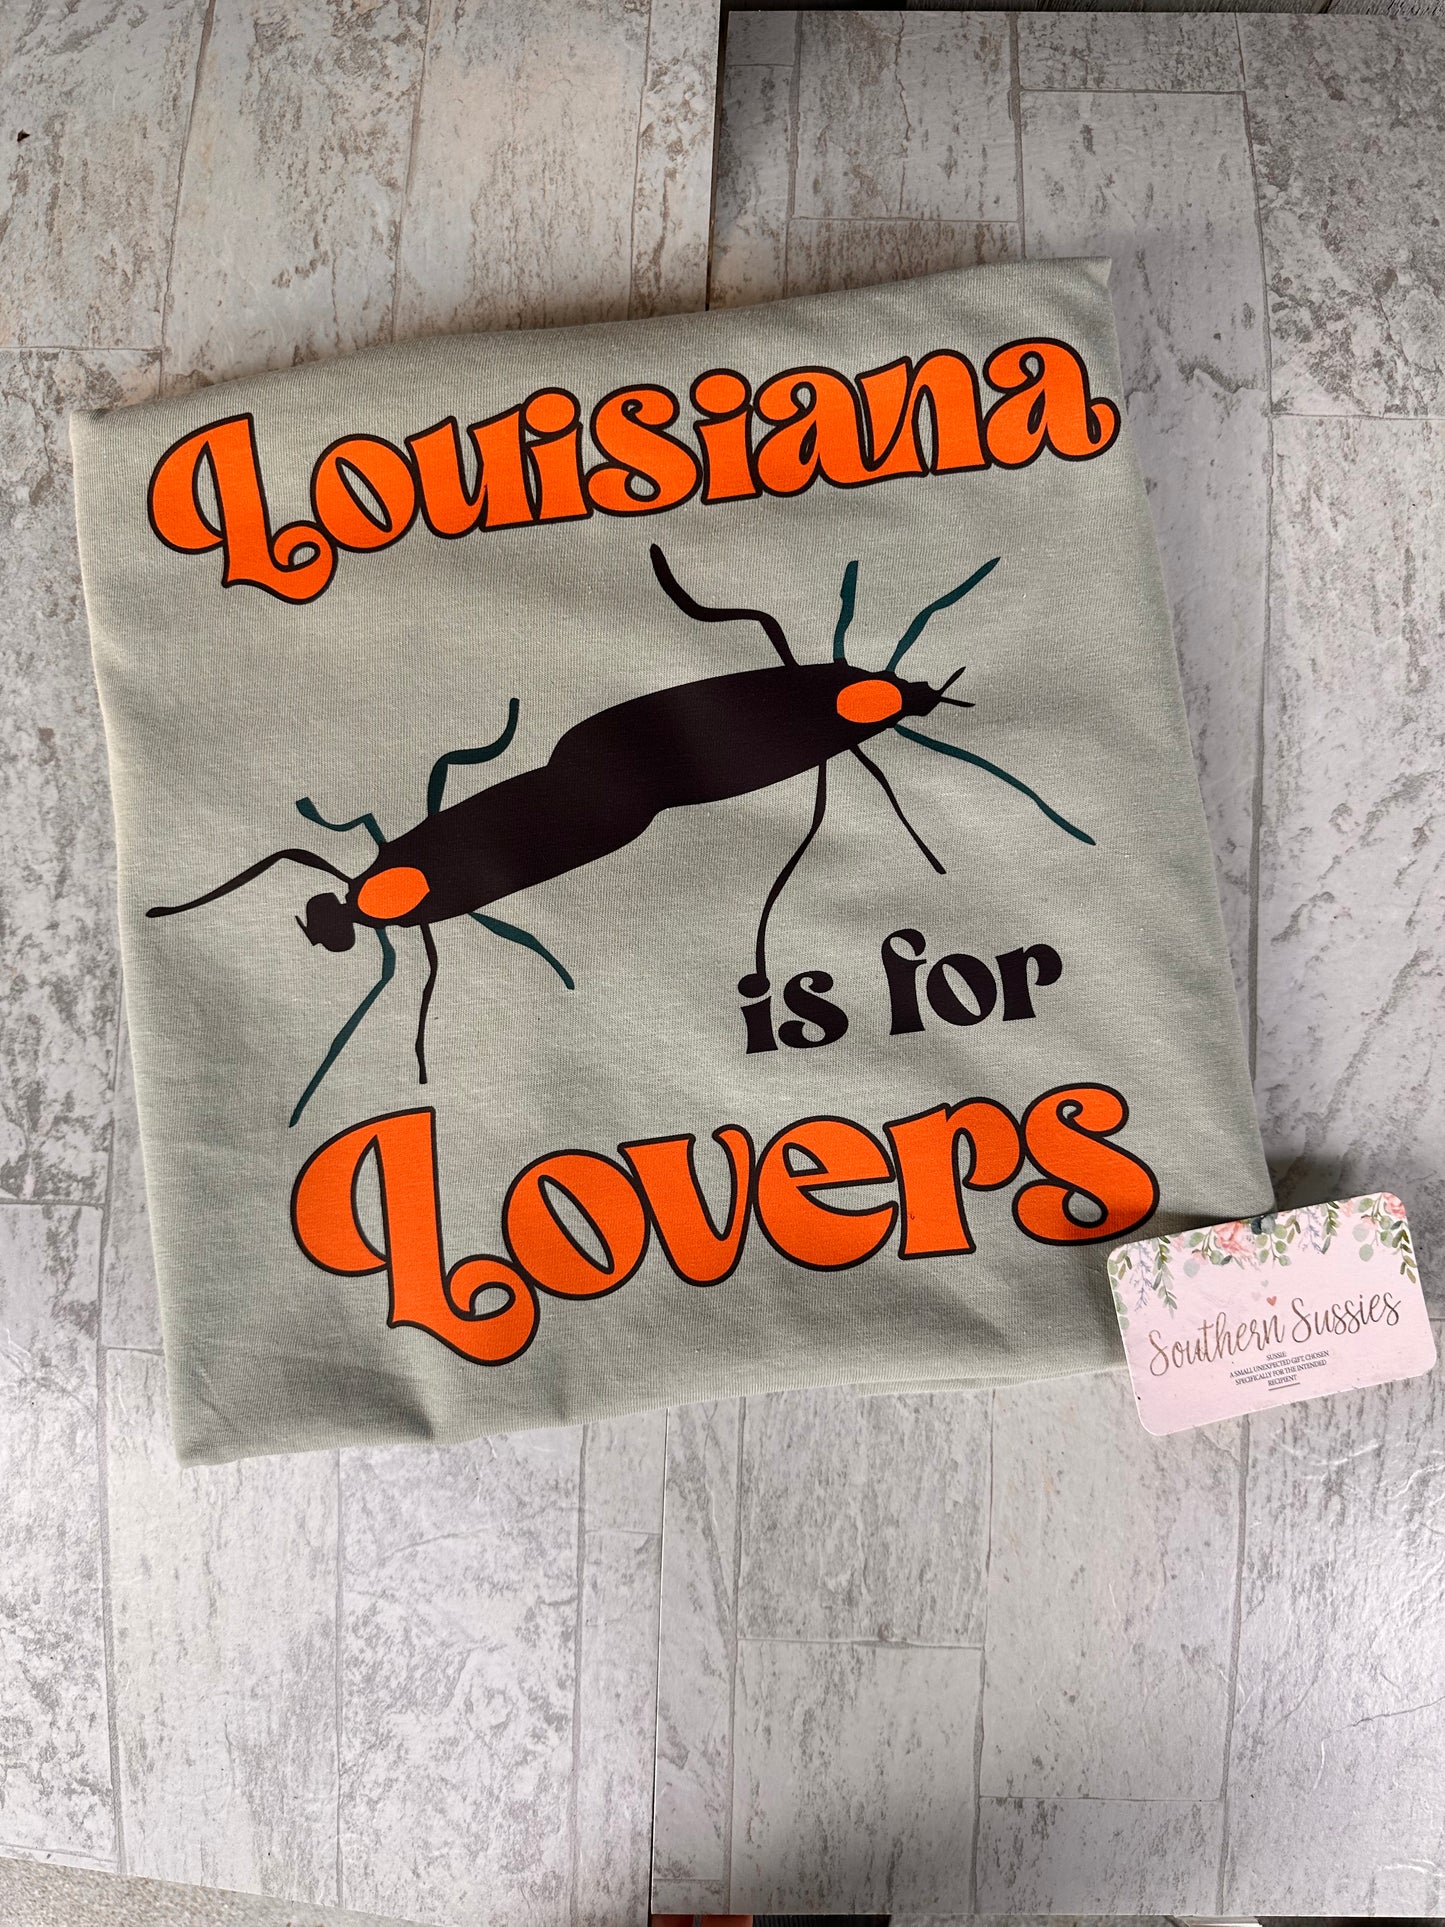 Louisiana is for Lovers